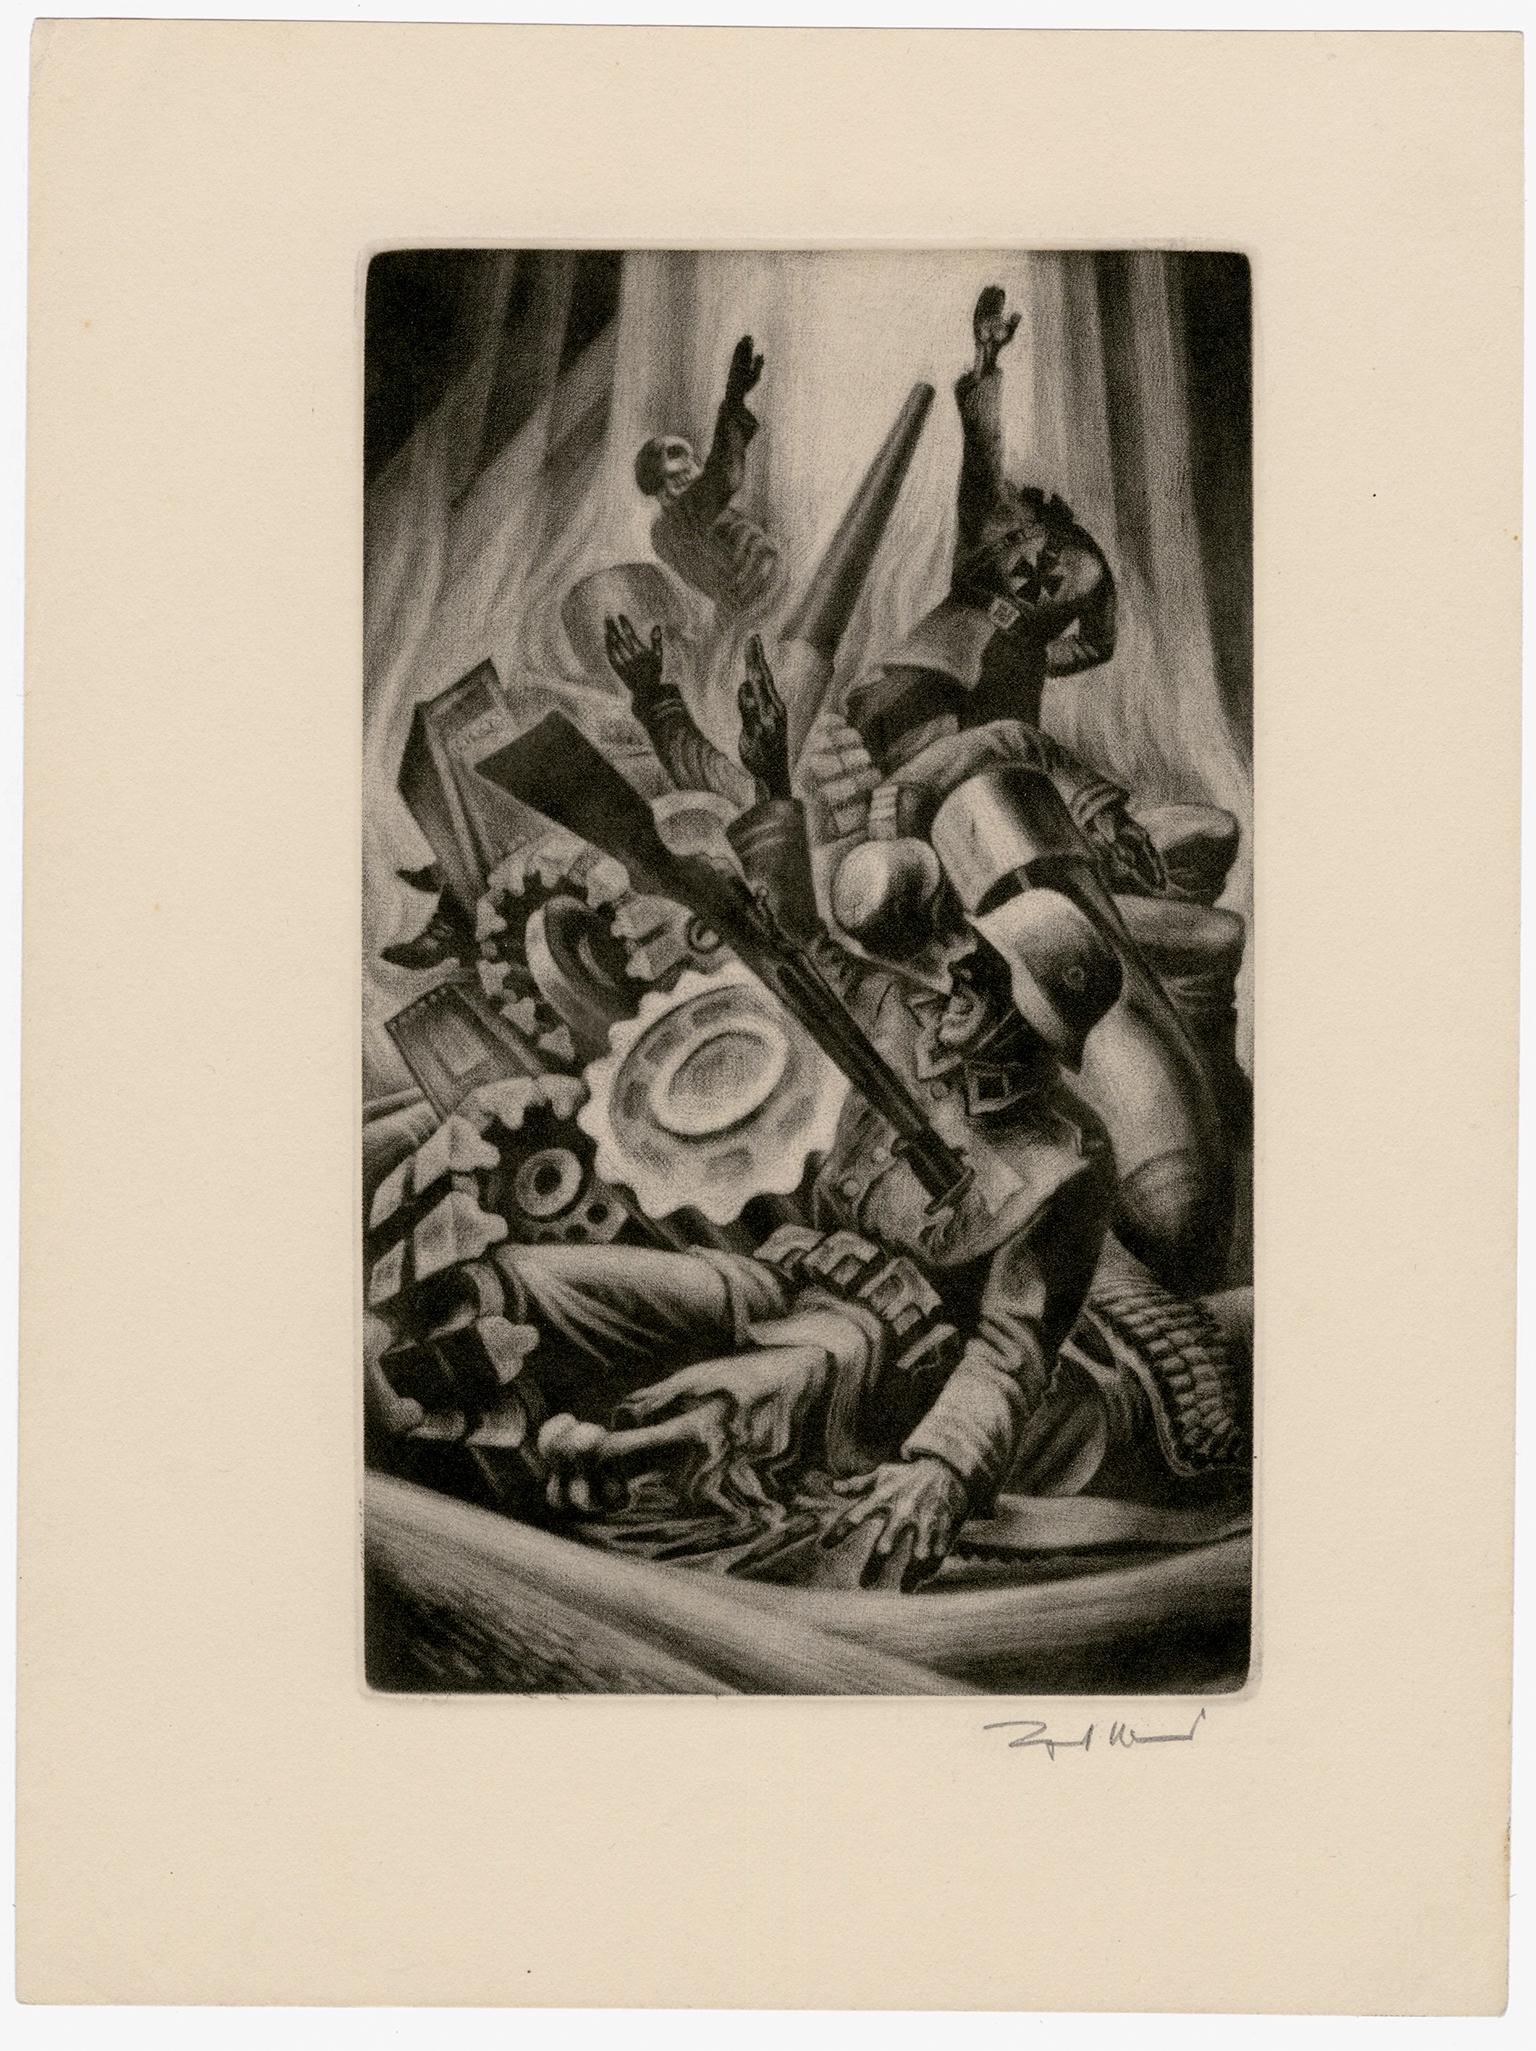 'Dogs of War' from 'In Praise of Folly' — 1940s Graphic Modernism - Print by Lynd Ward